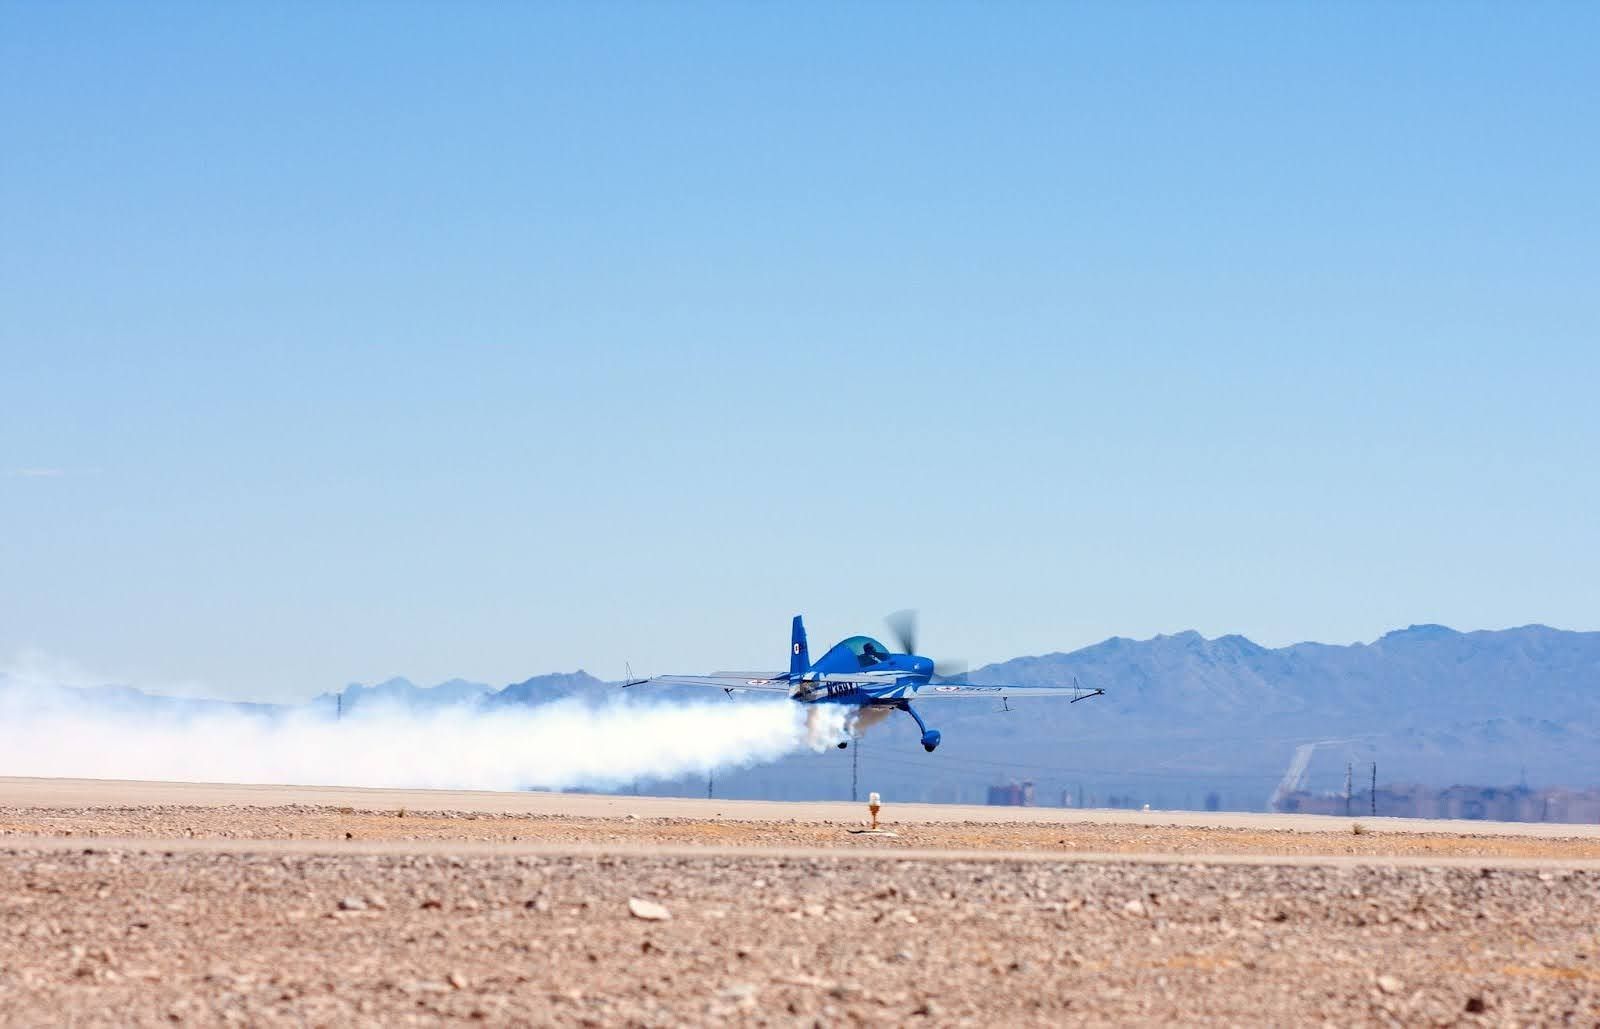 Blue stunt plane flying low to the ground